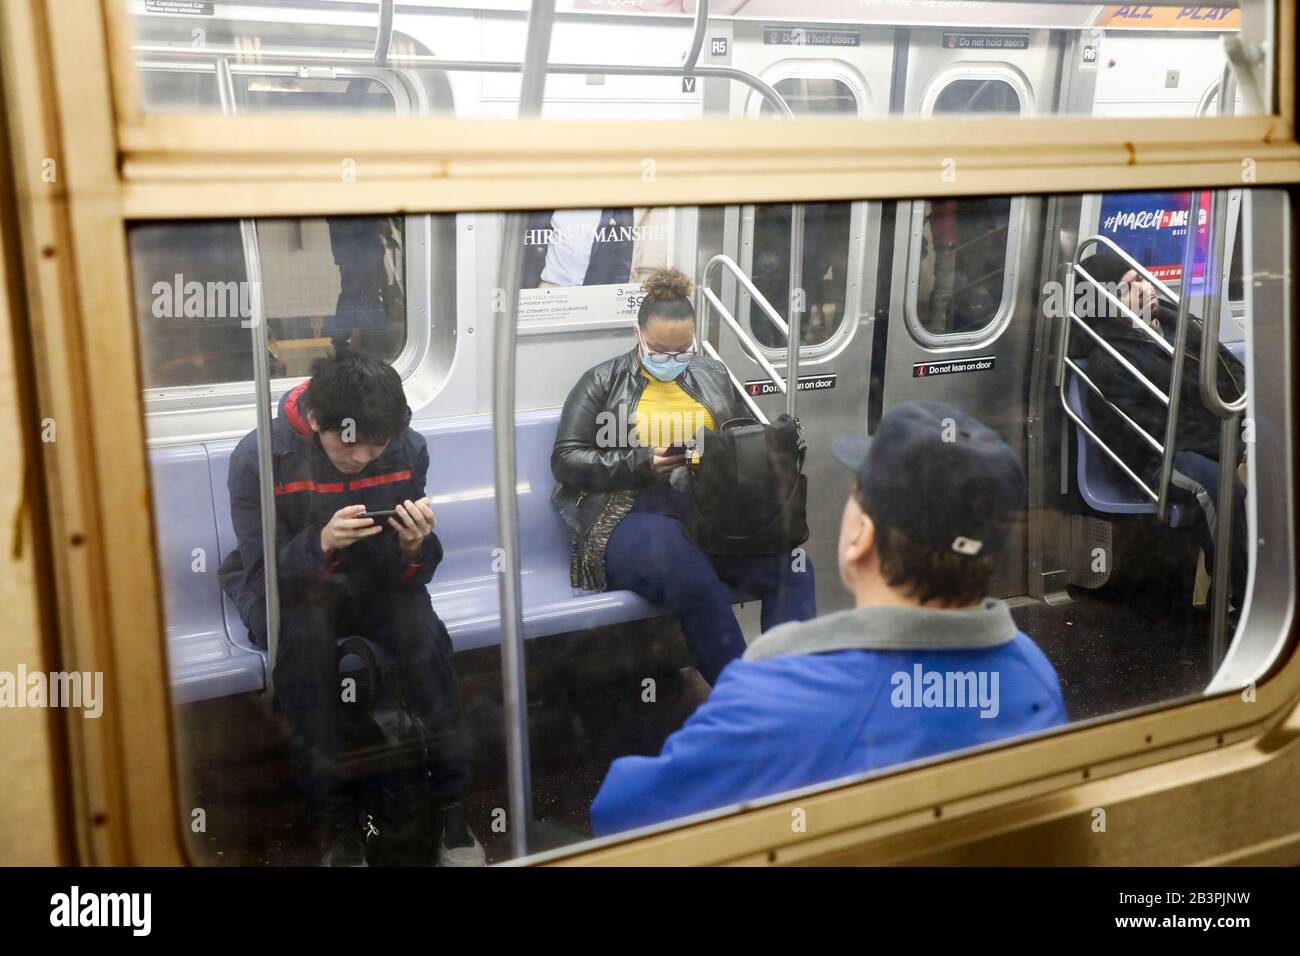 New York, USA. 4th Mar, 2020. A passenger with face mask is seen in a metro train in Manhattan of New York, the United States, March 4, 2020. U.S. health authorities on Wednesday reported a total of 129 confirmed cases of COVID-19 and a death toll of 11 in the country. Credit: Wang Ying/Xinhua/Alamy Live News Stock Photo